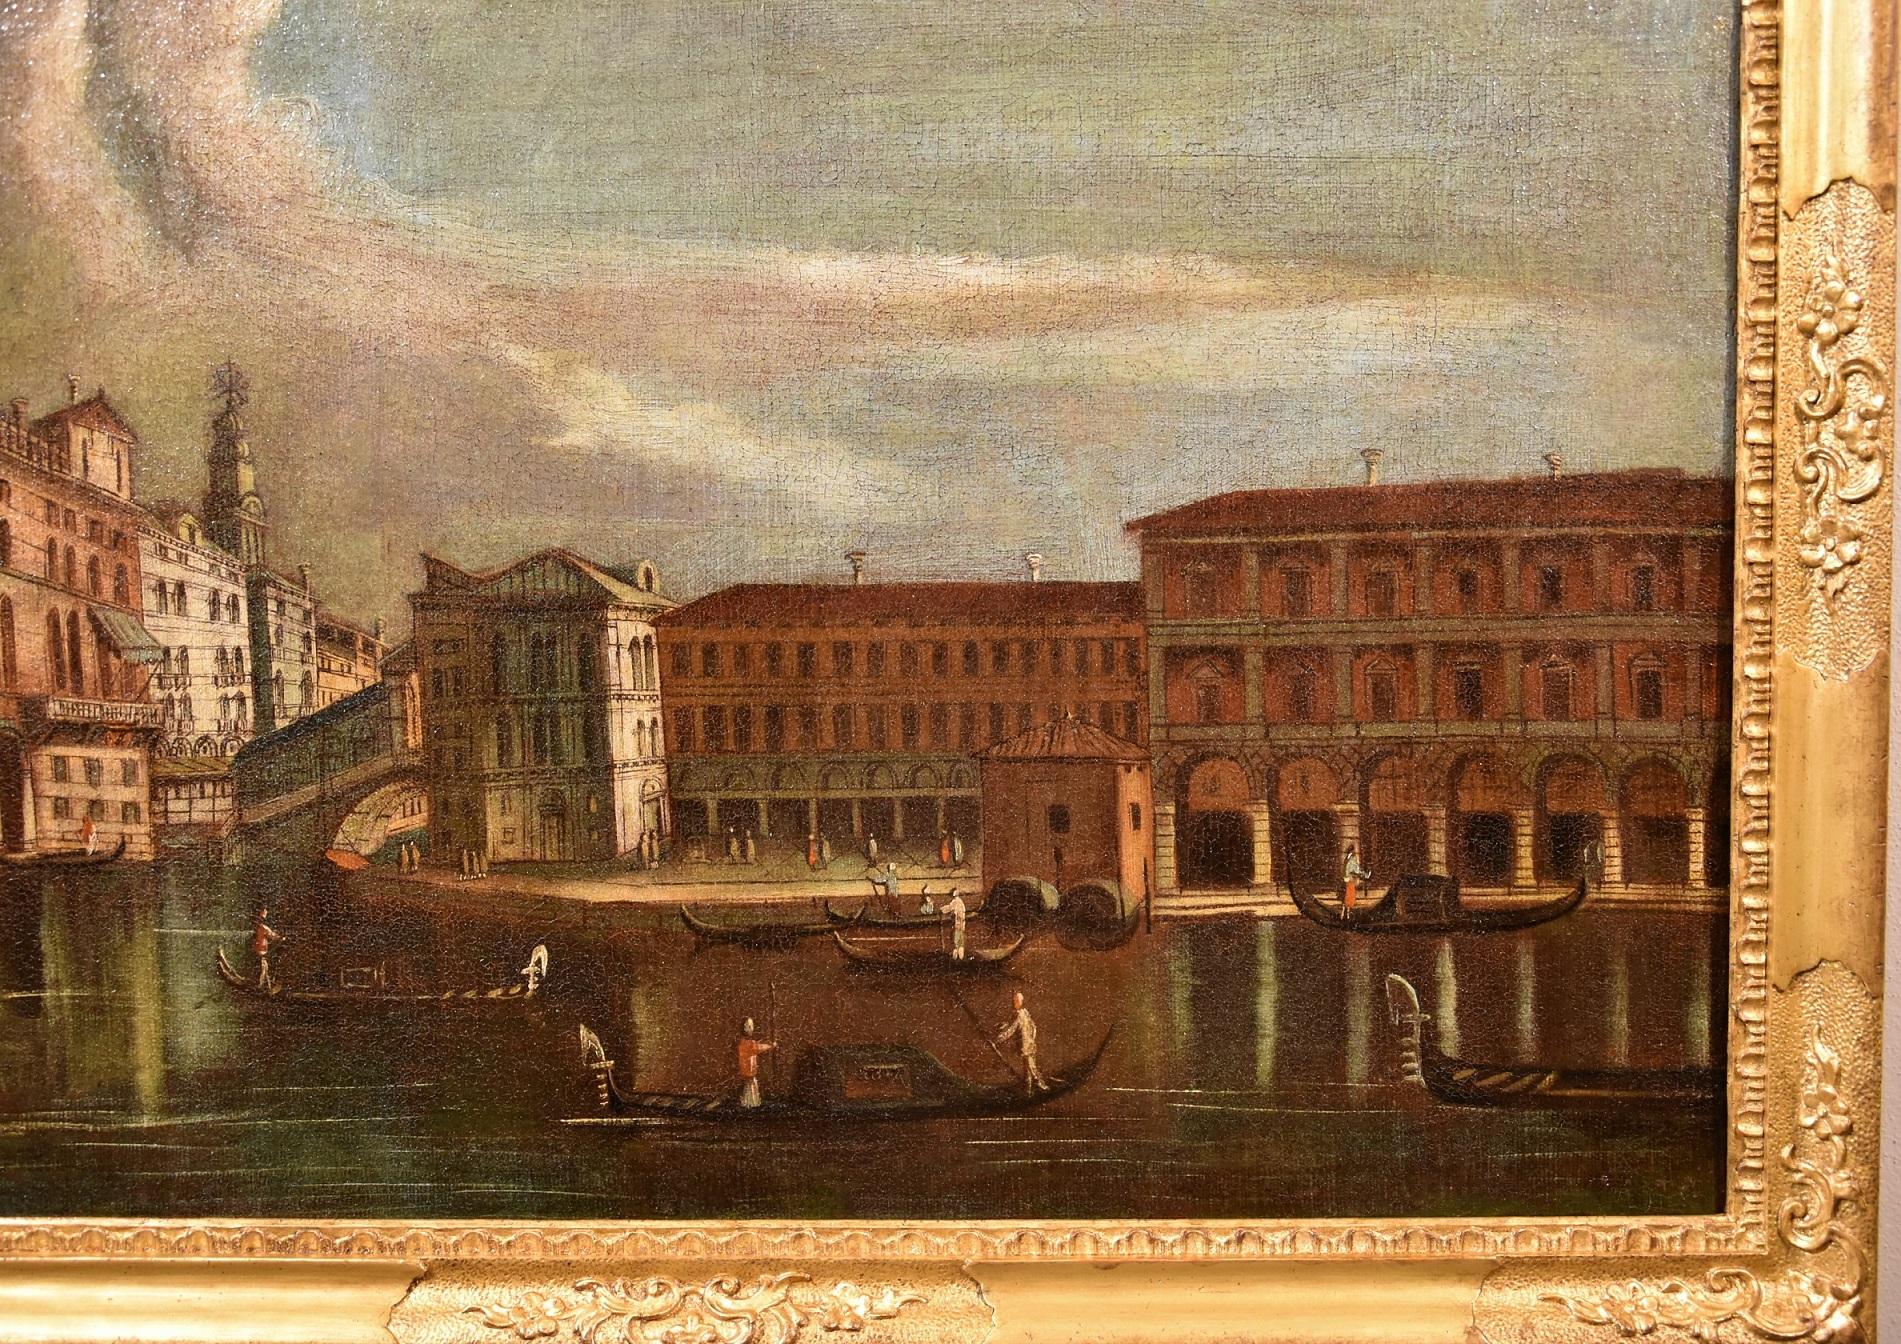 Francesco Tironi (Venice, about 1745 - 1797) attributable to
The Grand Canal with the Rialto bridge, the Palazzo dei Camerlenghi and the Fabbriche Vecchie

oil painting on canvas - cm. 72 x 94 - with frame cm. 83 x 111

The proposed painting is to